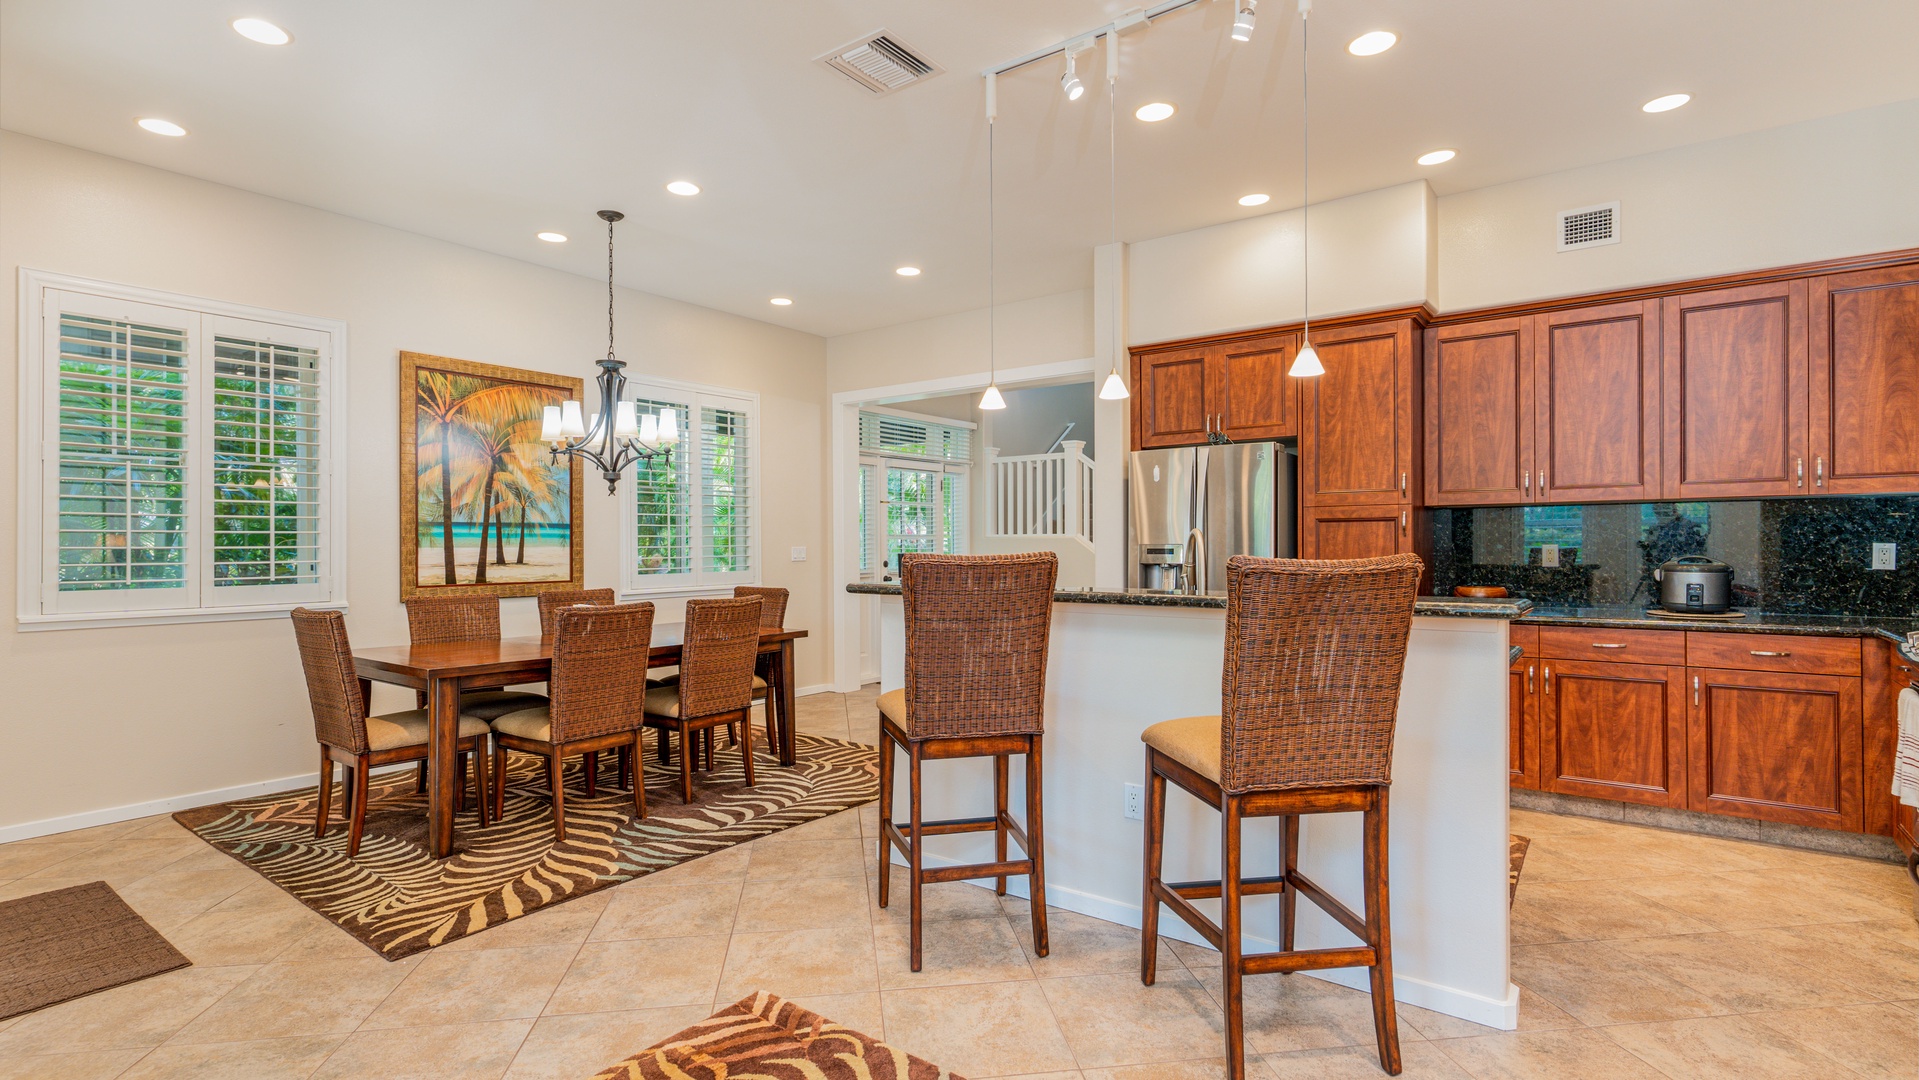 Kapolei Vacation Rentals, Coconut Plantation 1234-2 - Enjoy bar seating at the kitchen and converse with the chef.